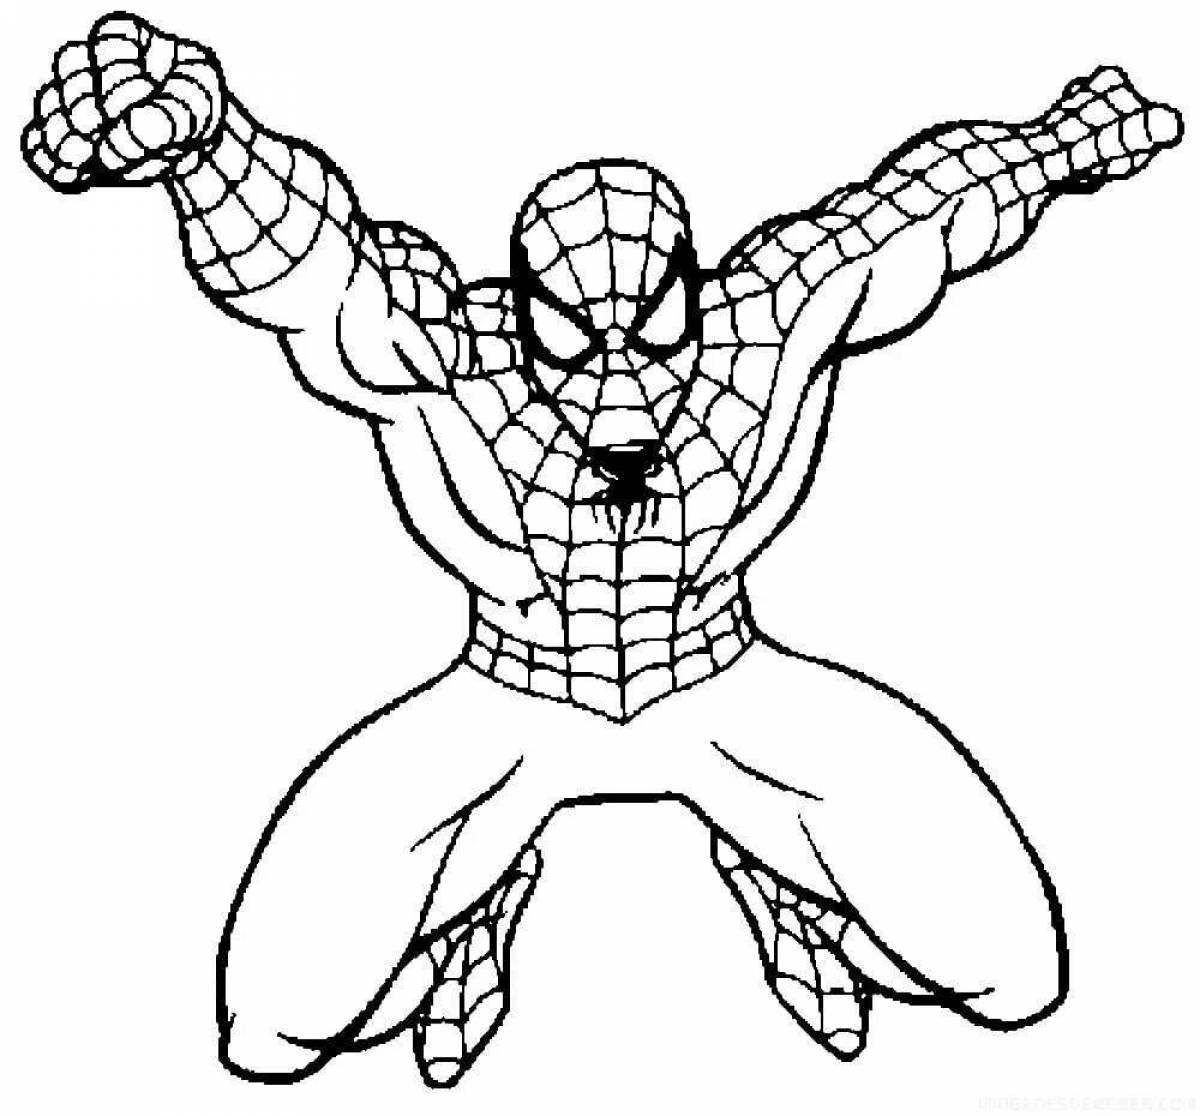 Spider-man fun coloring book for kids 5 years old